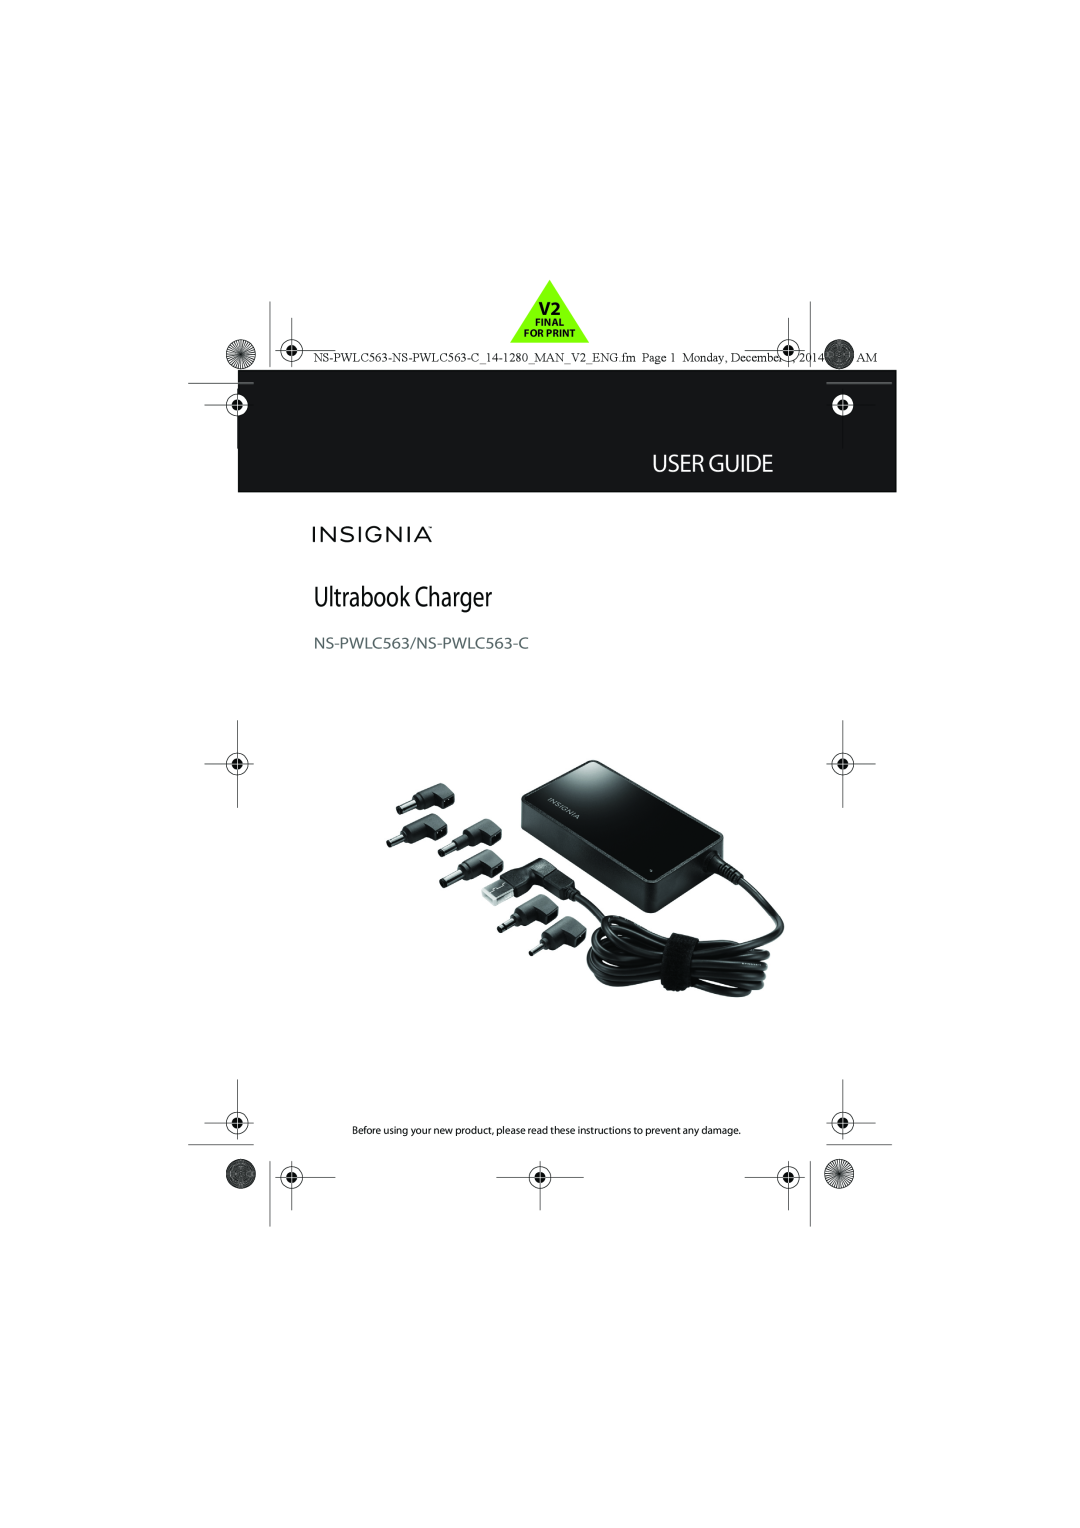 Insignia manual Ultrabook Charger, User Guide, NS-PWLC563/NS-PWLC563-C 